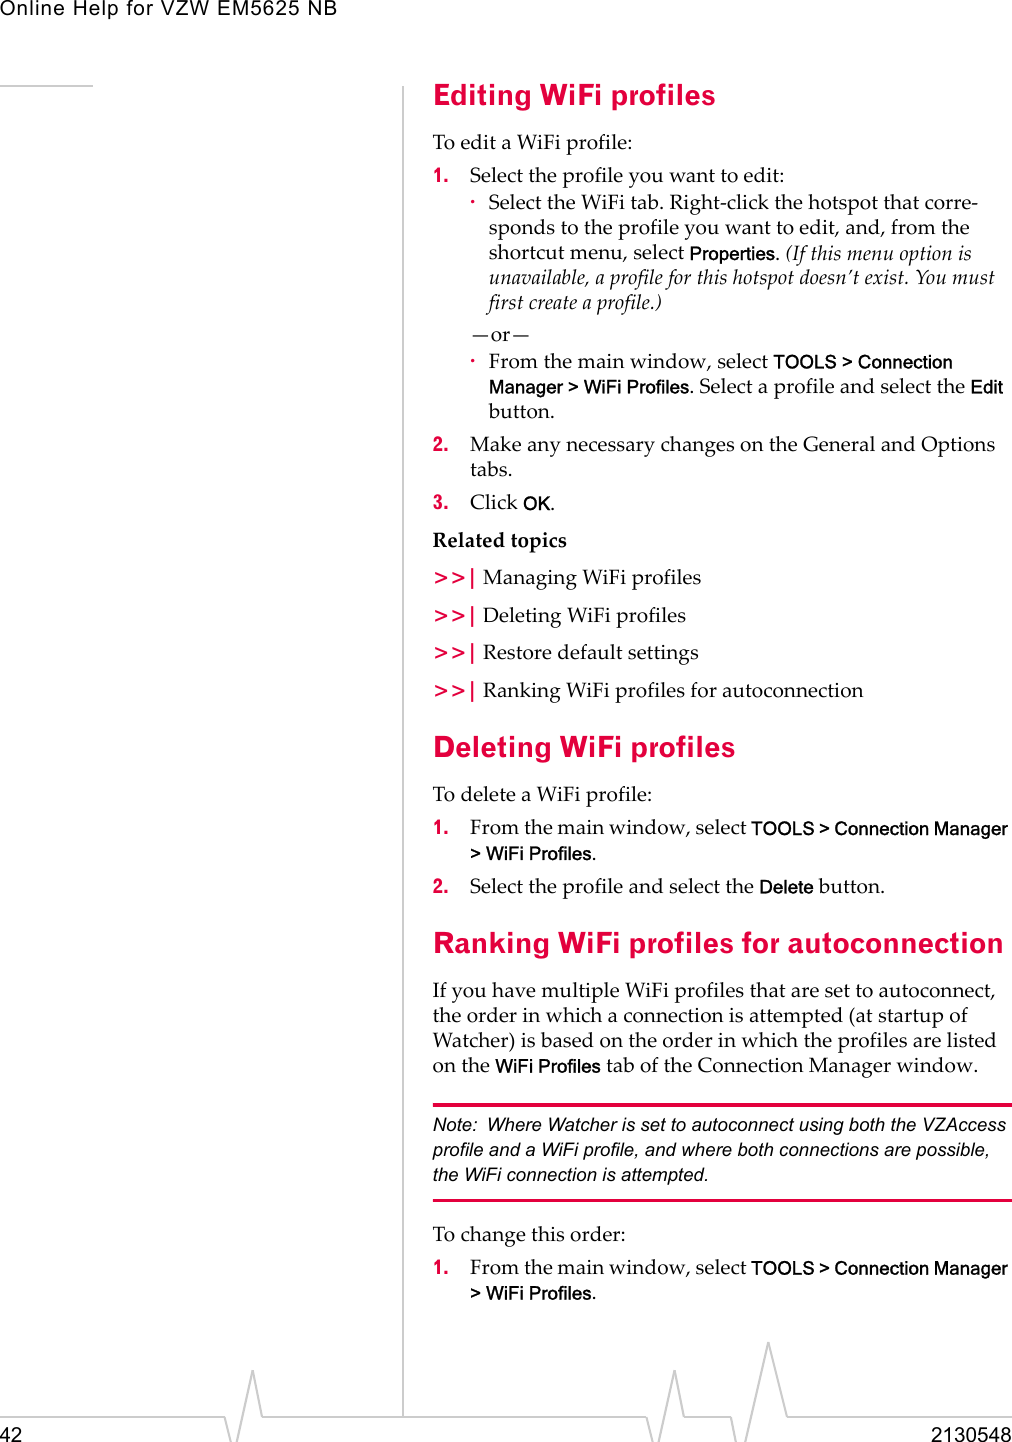 Online Help for VZW EM5625 NB42 2130548Editing WiFi profilesTo edit a WiFi profile:1. Select the profile you want to edit:·Select the WiFi tab. Right-click the hotspot that corre-sponds to the profile you want to edit, and, from the shortcut menu, select Properties. (If this menu option is unavailable, a profile for this hotspot doesn’t exist. You must first create a profile.)—or—·From the main window, select TOOLS &gt; Connection Manager &gt; WiFi Profiles. Select a profile and select the Edit button.2. Make any necessary changes on the General and Options tabs.3. Click OK.Related topics&gt;&gt;| Managing WiFi profiles&gt;&gt;| Deleting WiFi profiles&gt;&gt;| Restore default settings&gt;&gt;| Ranking WiFi profiles for autoconnectionDeleting WiFi profilesTo delete a WiFi profile:1. From the main window, select TOOLS &gt; Connection Manager &gt; WiFi Profiles.2. Select the profile and select the Delete button.Ranking WiFi profiles for autoconnectionIf you have multiple WiFi profiles that are set to autoconnect, the order in which a connection is attempted (at startup of Watcher) is based on the order in which the profiles are listed on the WiFi Profiles tab of the Connection Manager window. Note: Where Watcher is set to autoconnect using both the VZAccess profile and a WiFi profile, and where both connections are possible, the WiFi connection is attempted.To change this order:1. From the main window, select TOOLS &gt; Connection Manager &gt; WiFi Profiles.